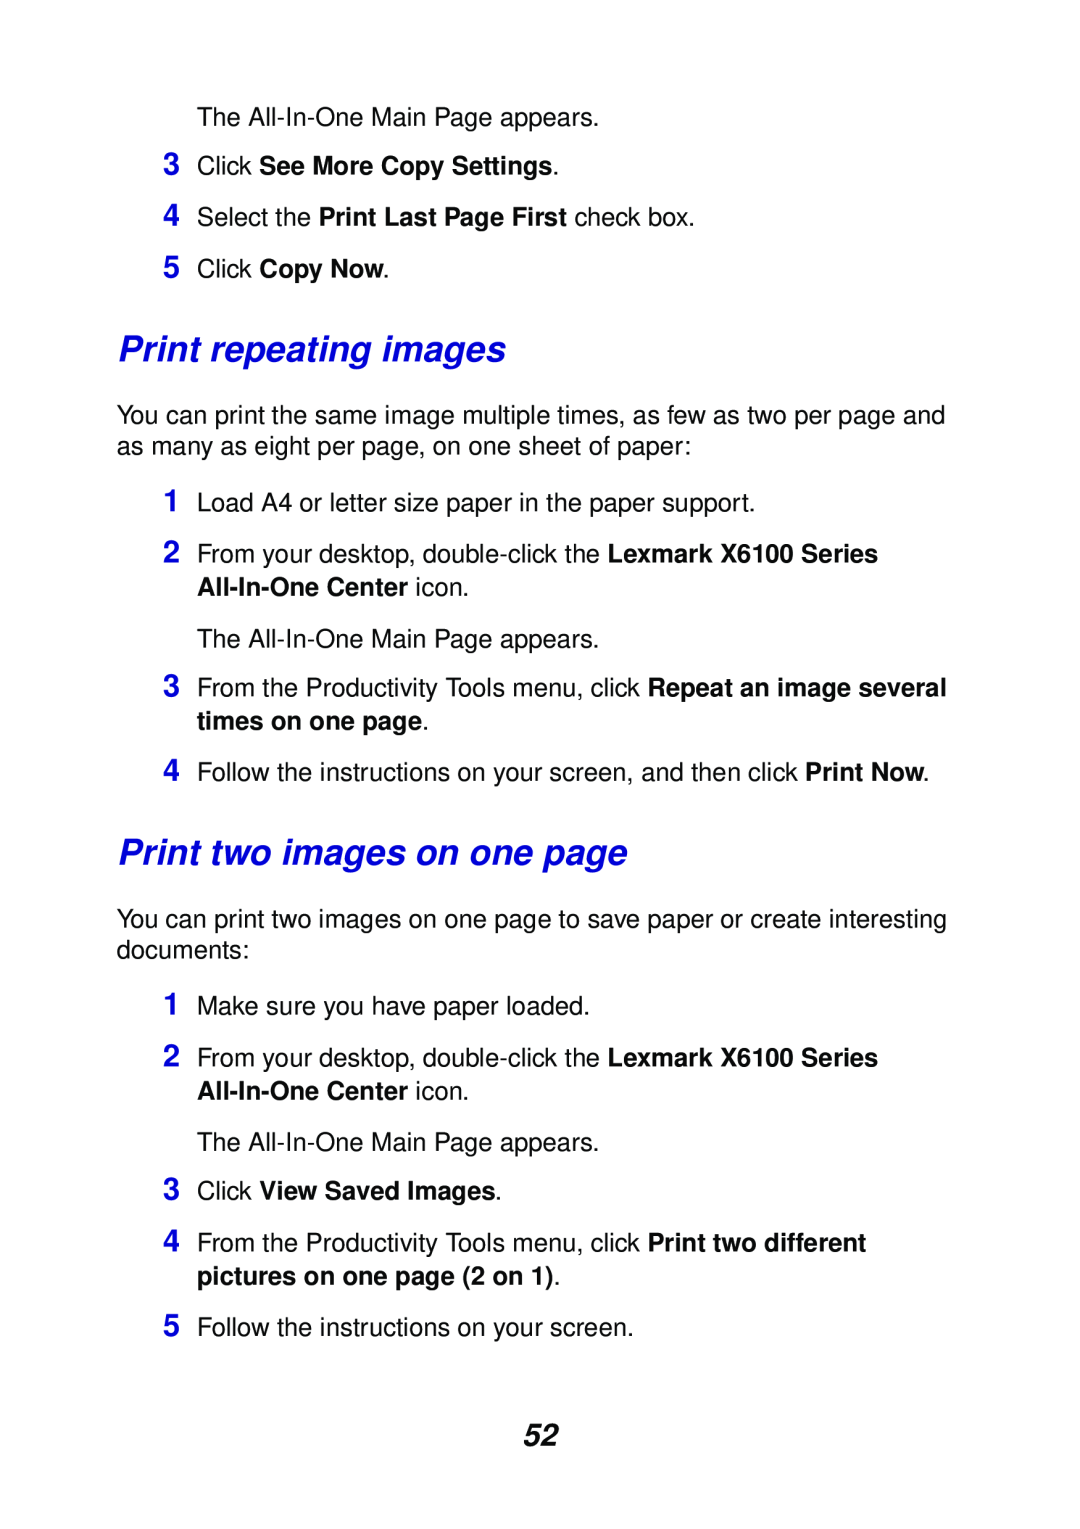 Lexmark X6100 manual Print repeating images, Print two images on one page, 3Click See More Copy Settings, 5Click Copy Now 